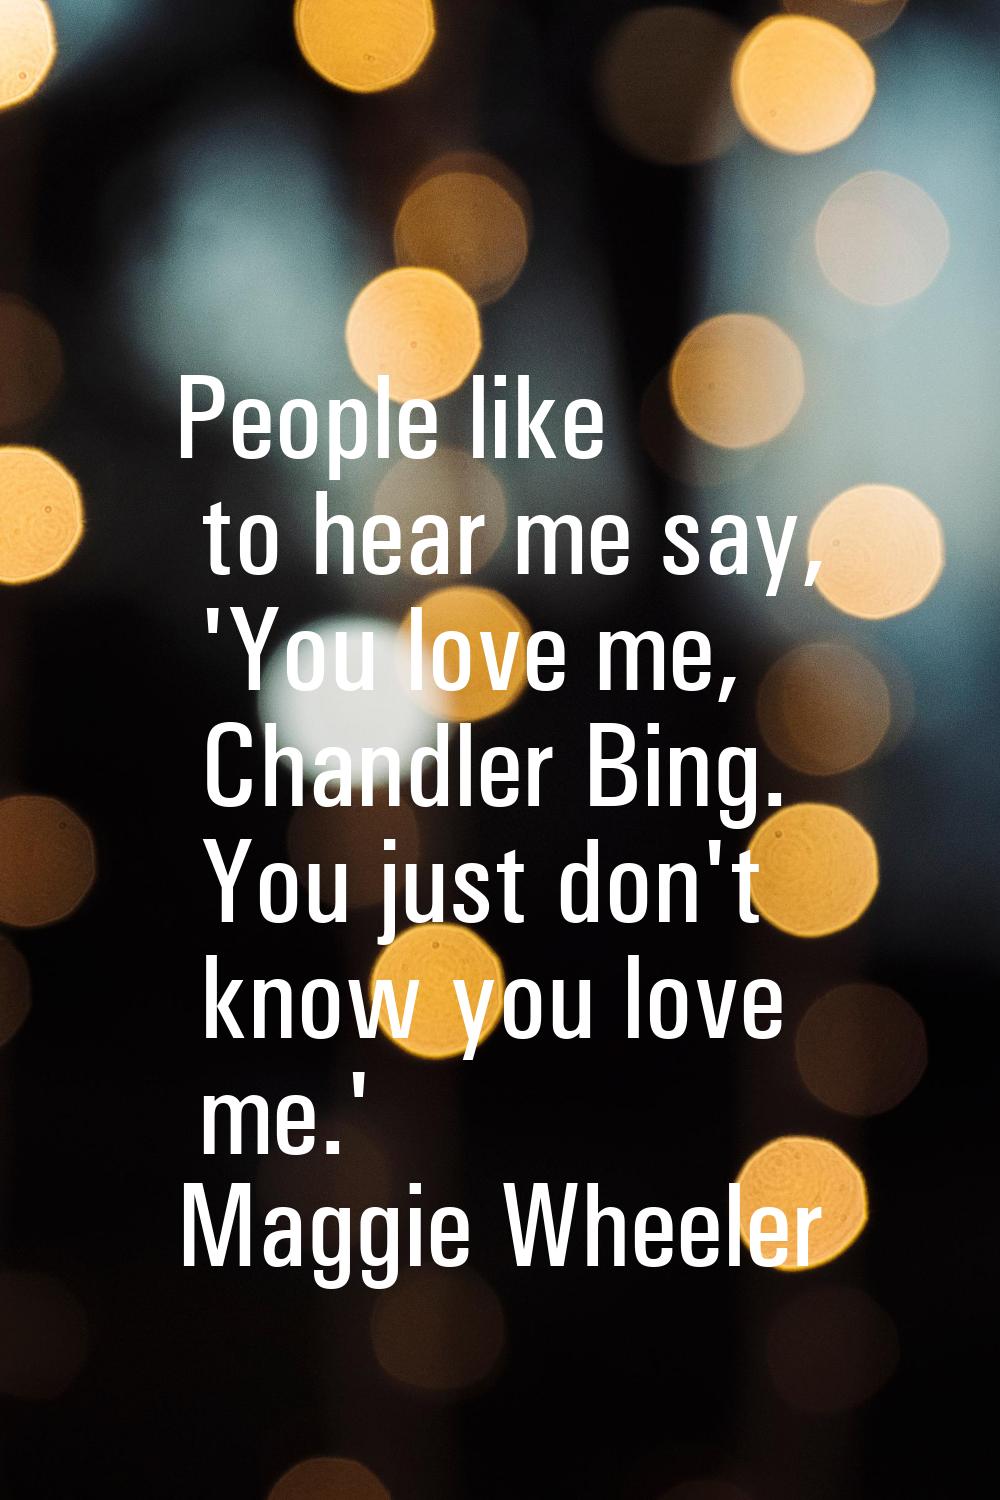 People like to hear me say, 'You love me, Chandler Bing. You just don't know you love me.'